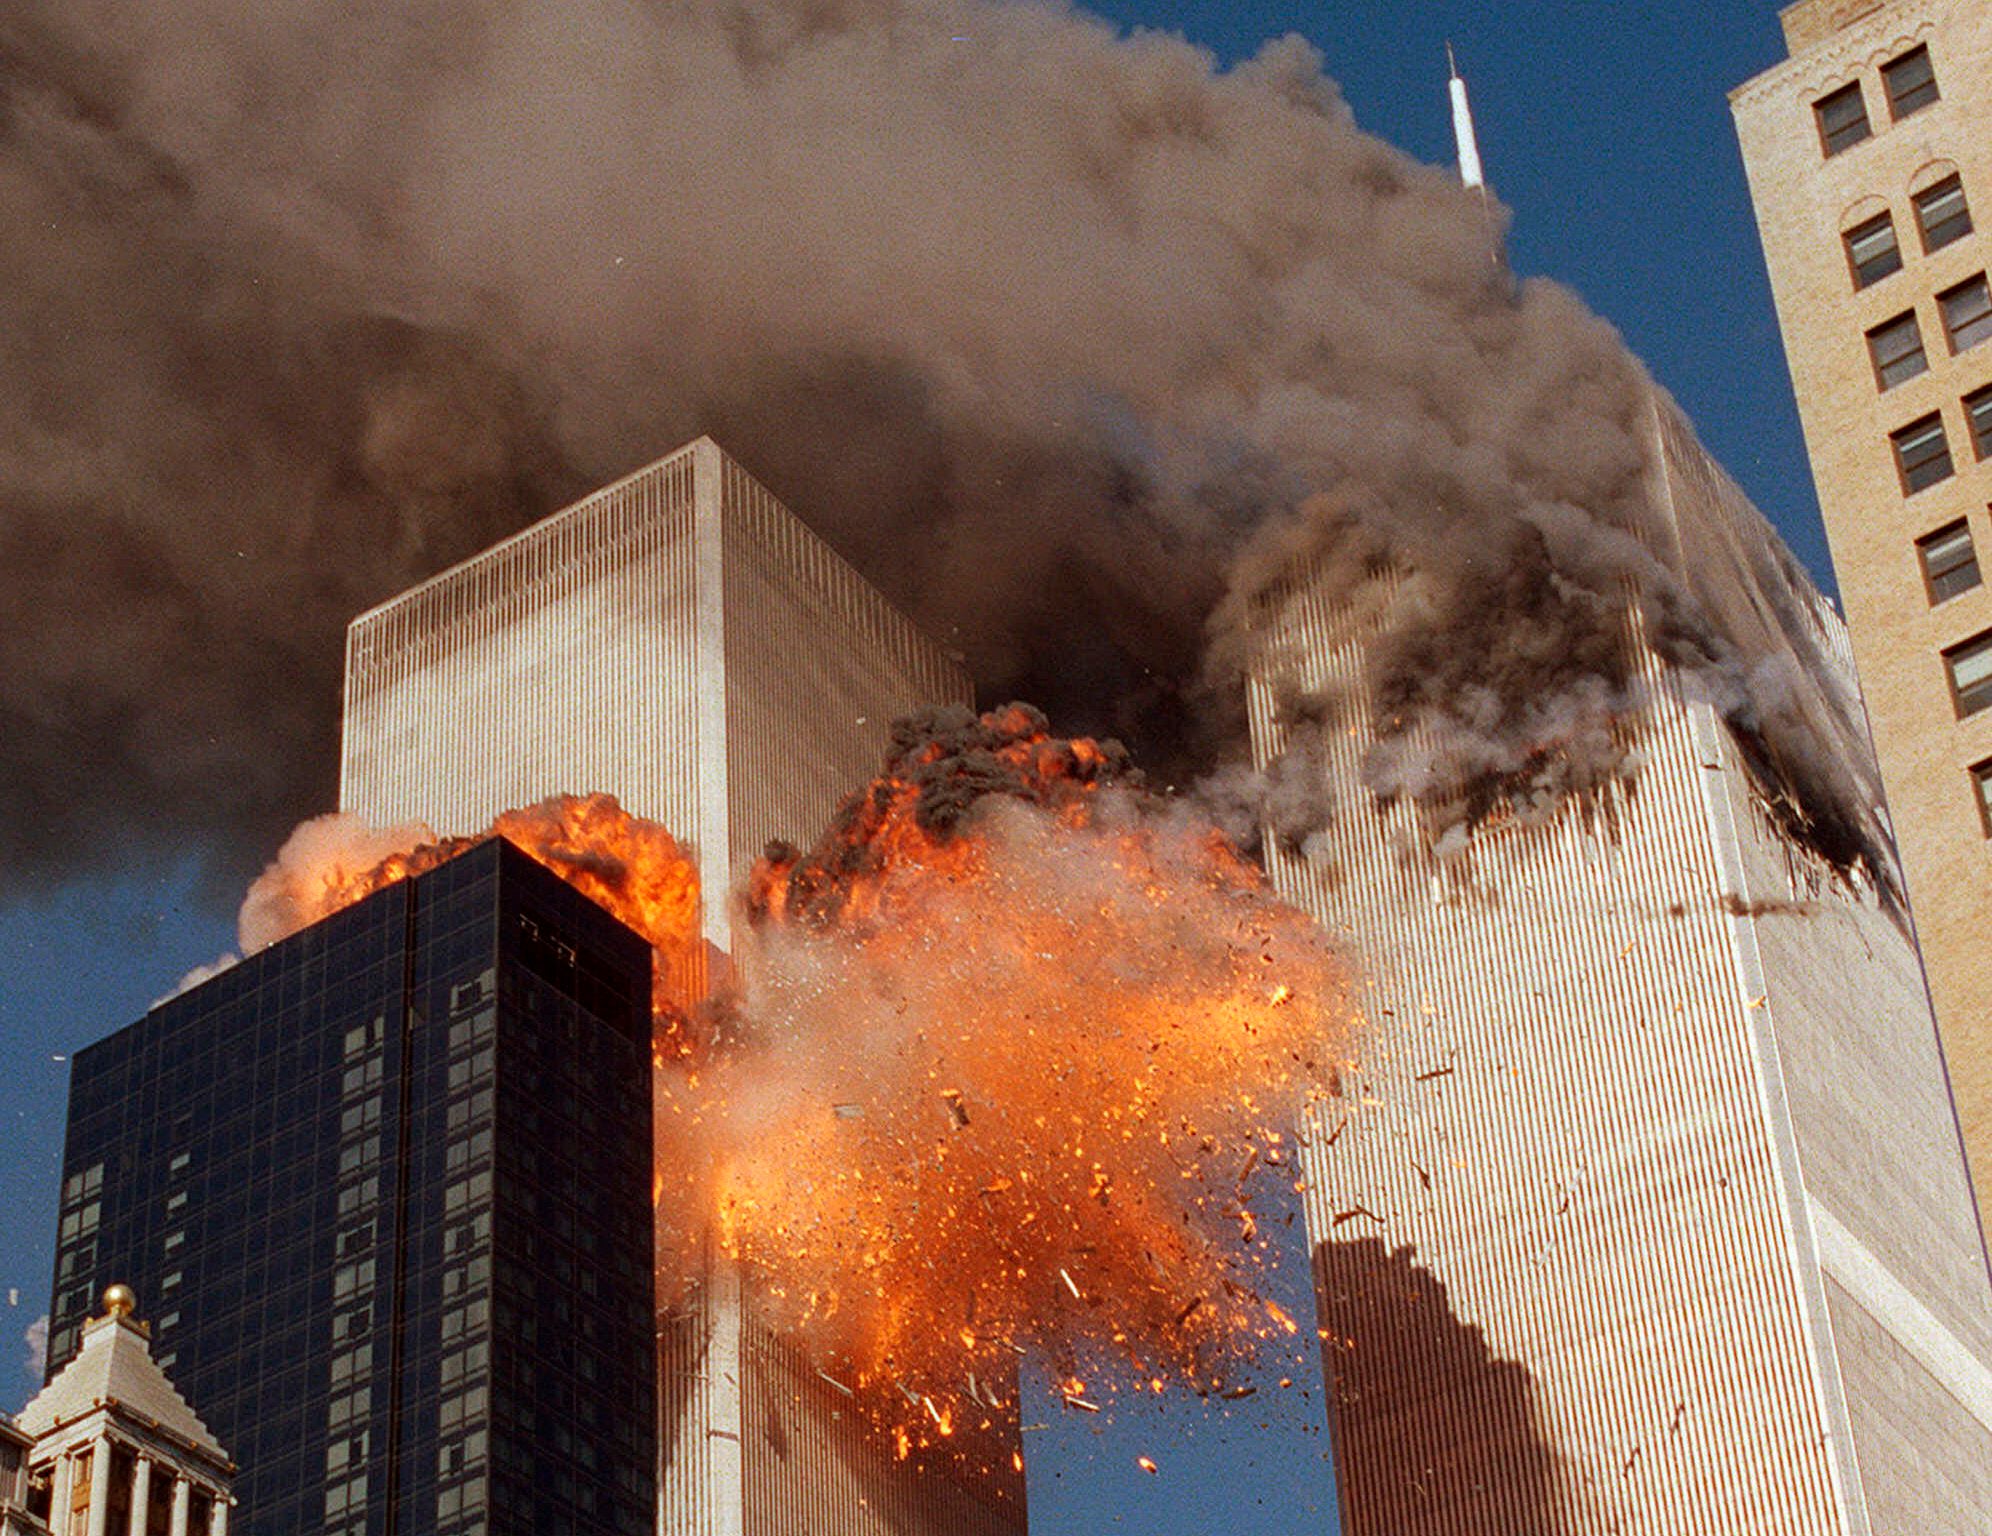 The second plane crashes into the World Trade Center on 11 September, 2001